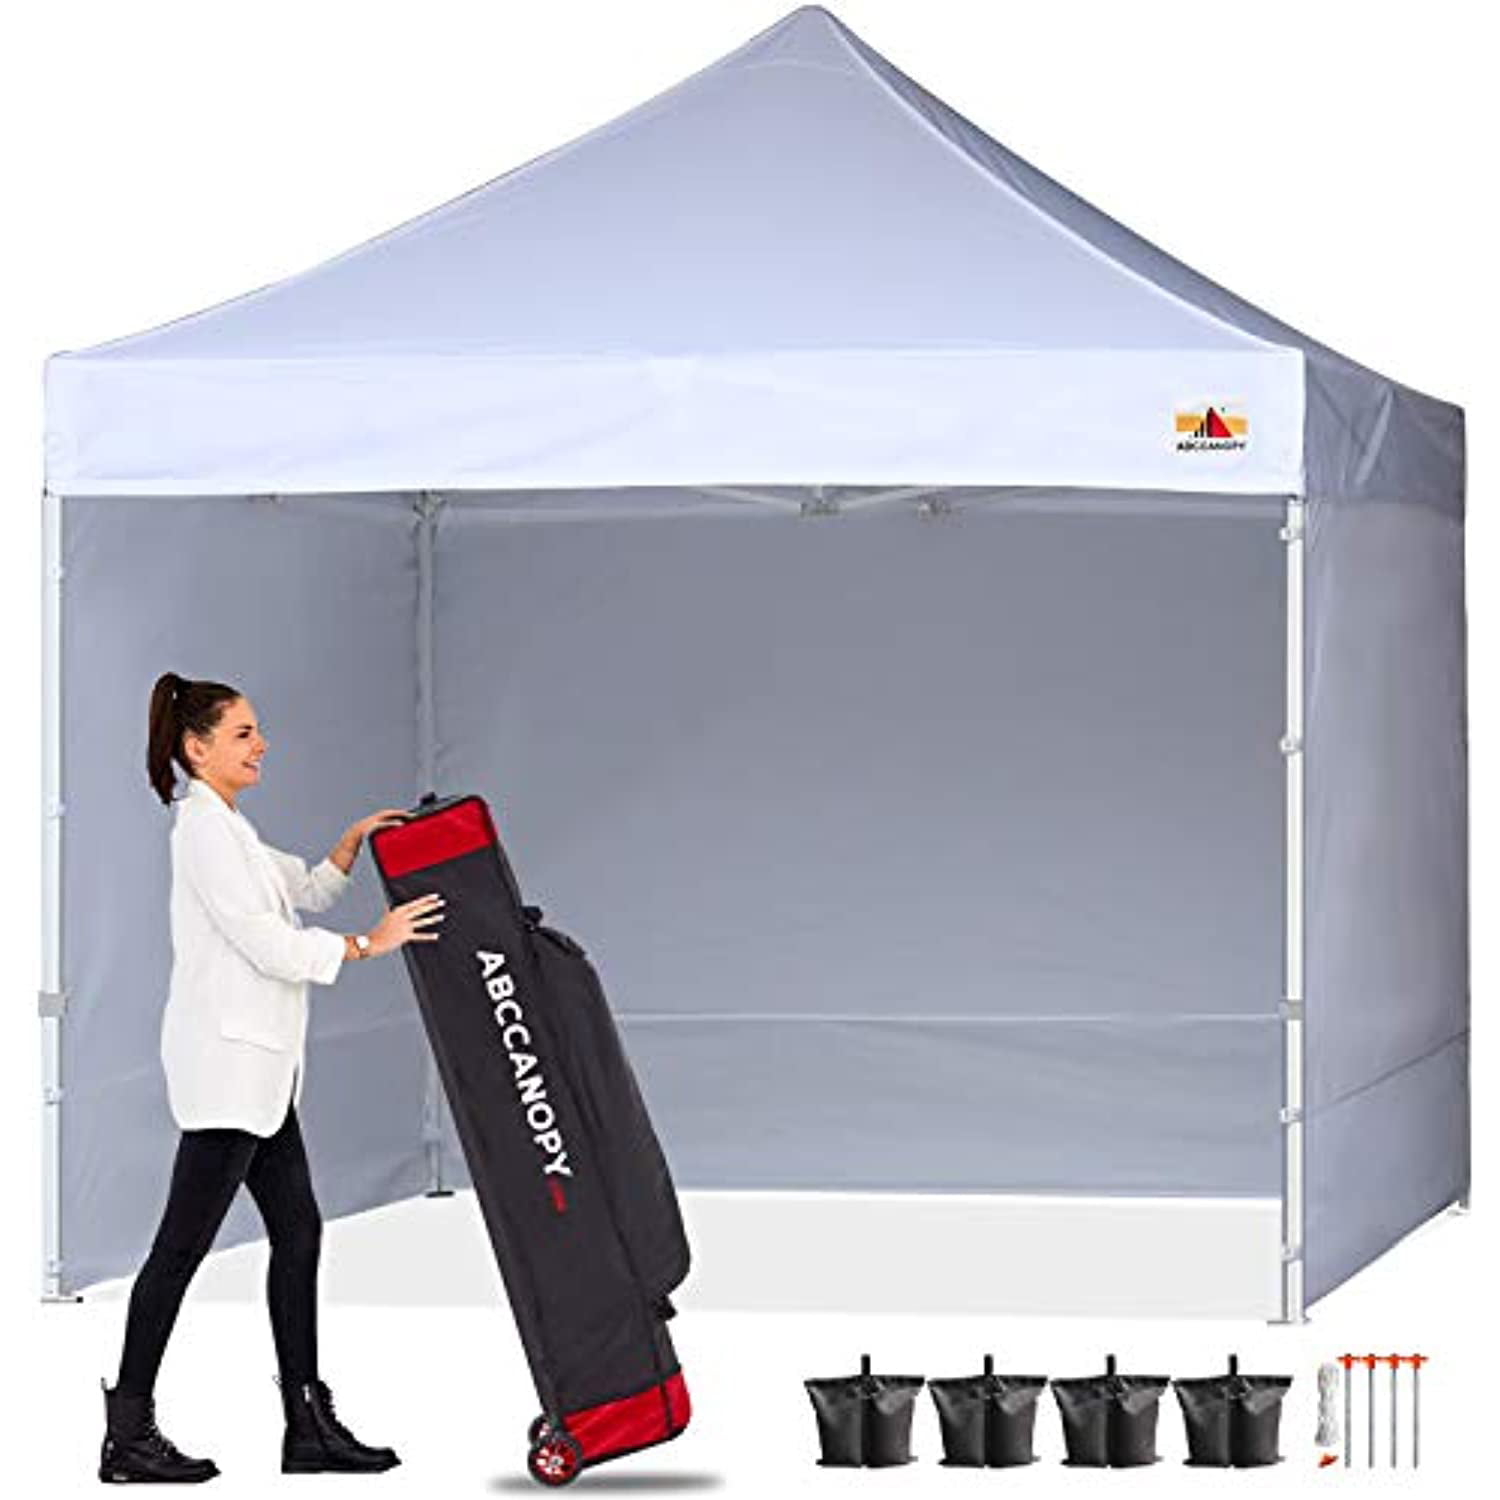 White Stakes and Ropes ABCCANOPY Canopy 10x10 Pop Up Commercial Canopy Tent with Side Walls Instant Shade 4 Weight Bags Bonus Upgrade Roller Bag